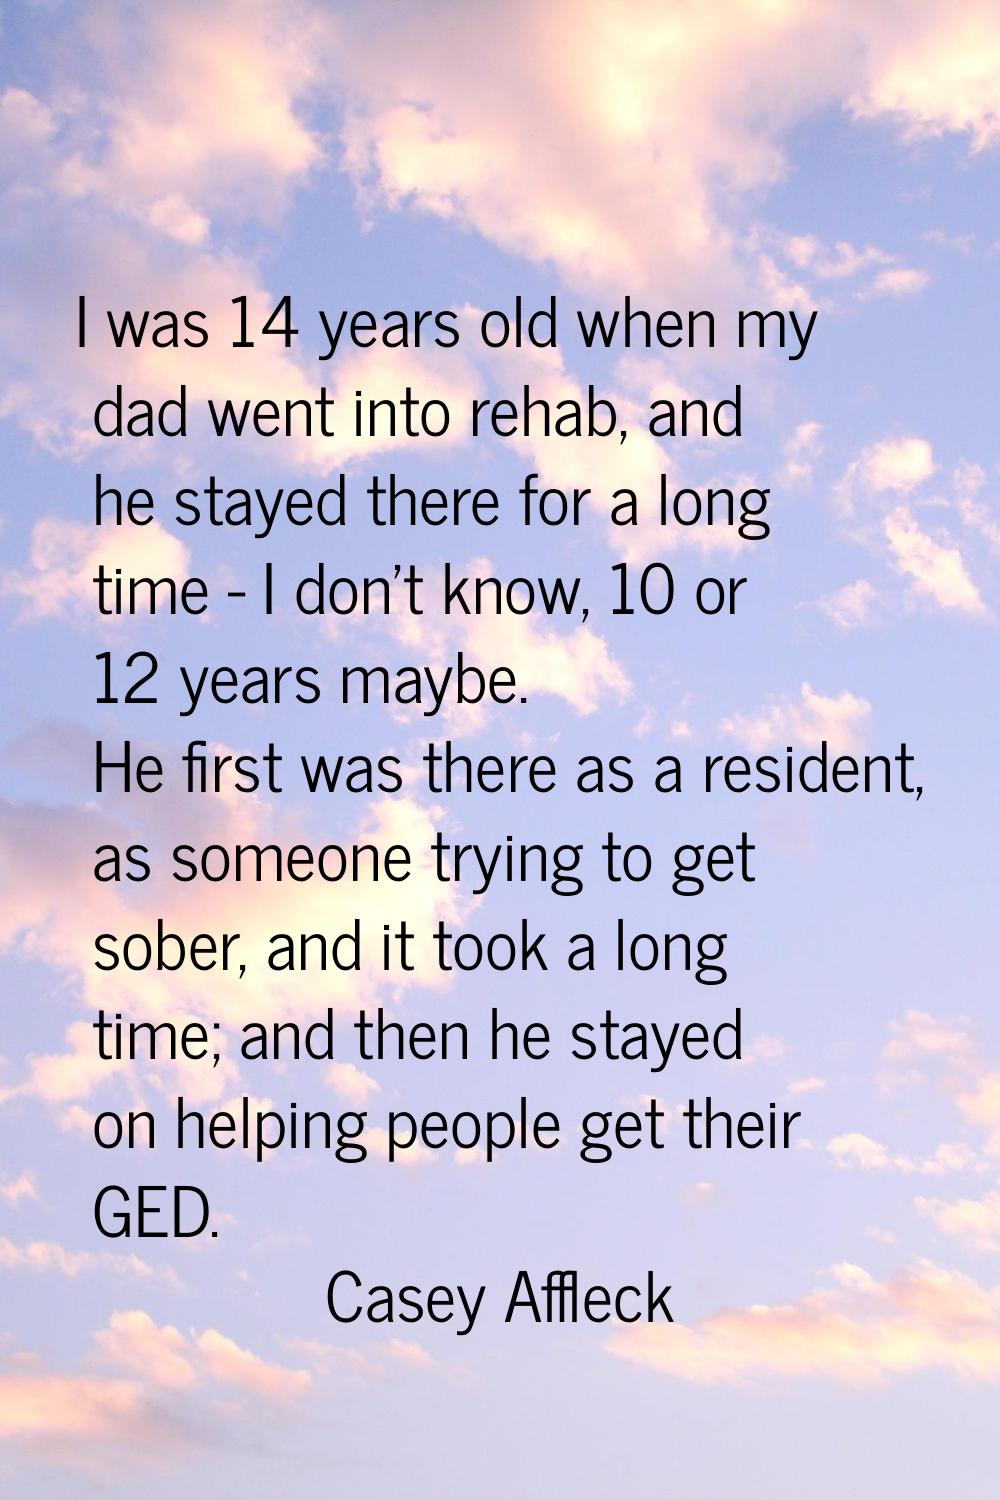 I was 14 years old when my dad went into rehab, and he stayed there for a long time - I don't know,